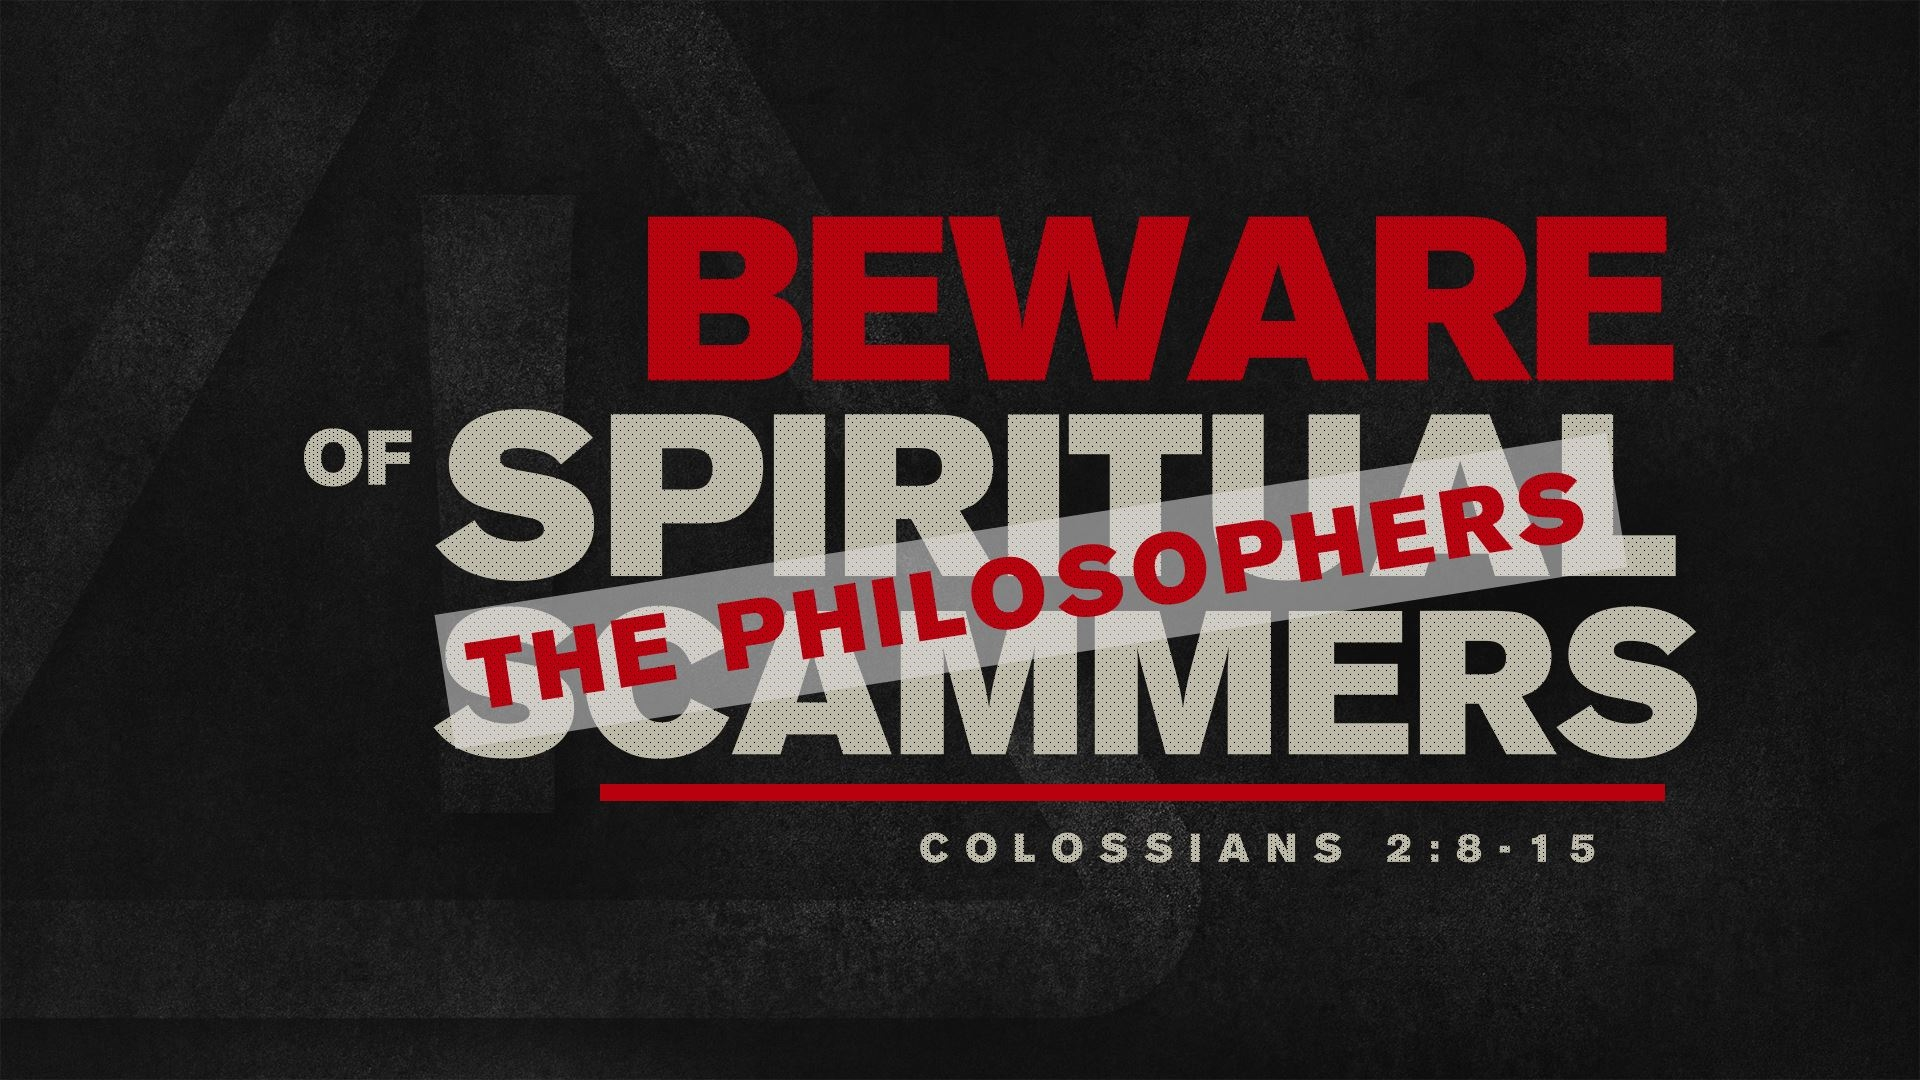 10112020 Beware of Spiritual Scammers: The Philosophers Colossians 2:8-15 - Faithlife Sermons